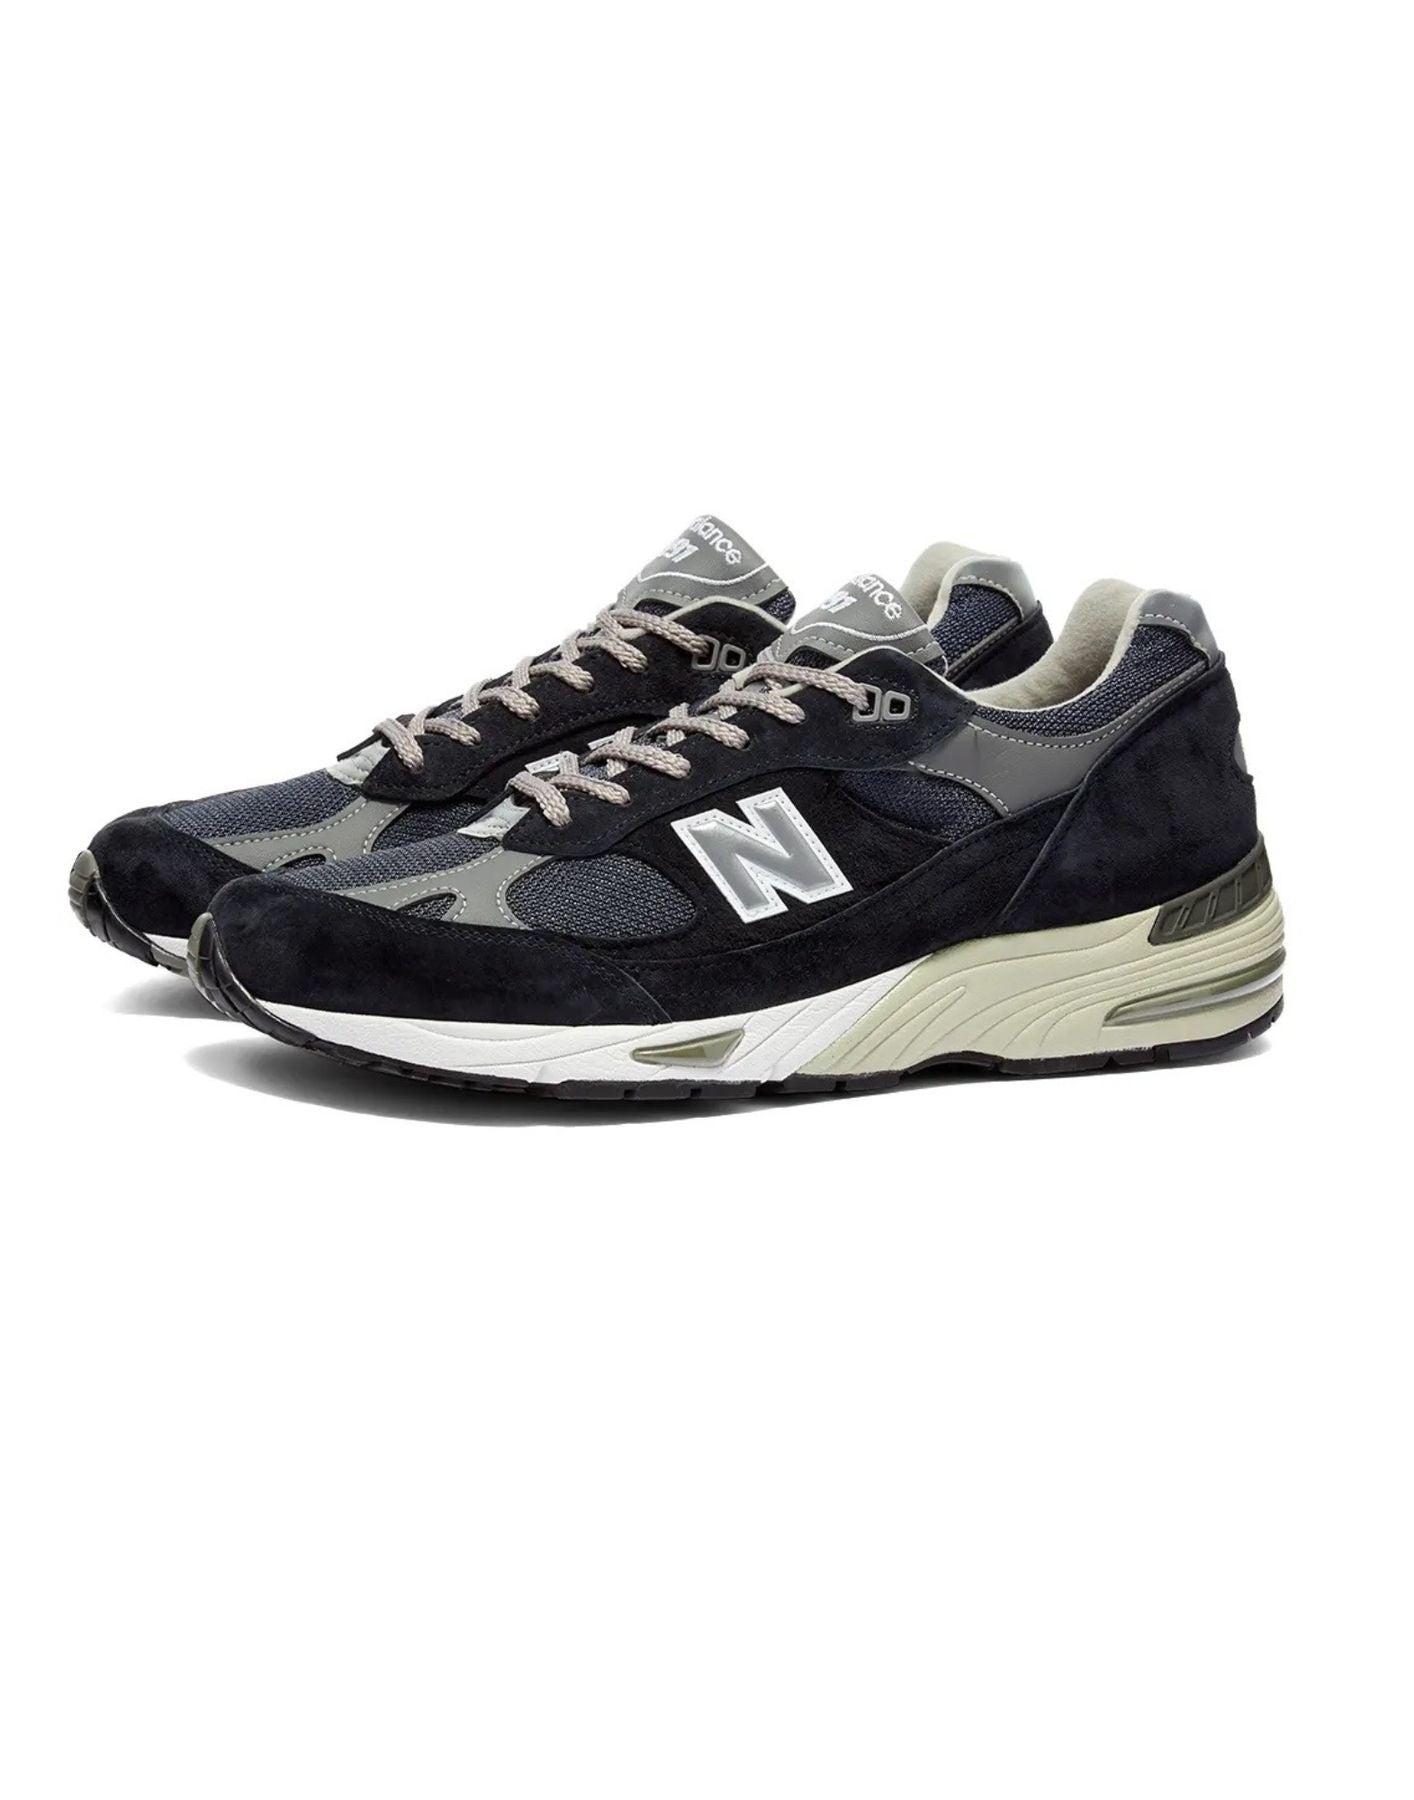 Chaussures pour hommes m991nv NEW BALANCE